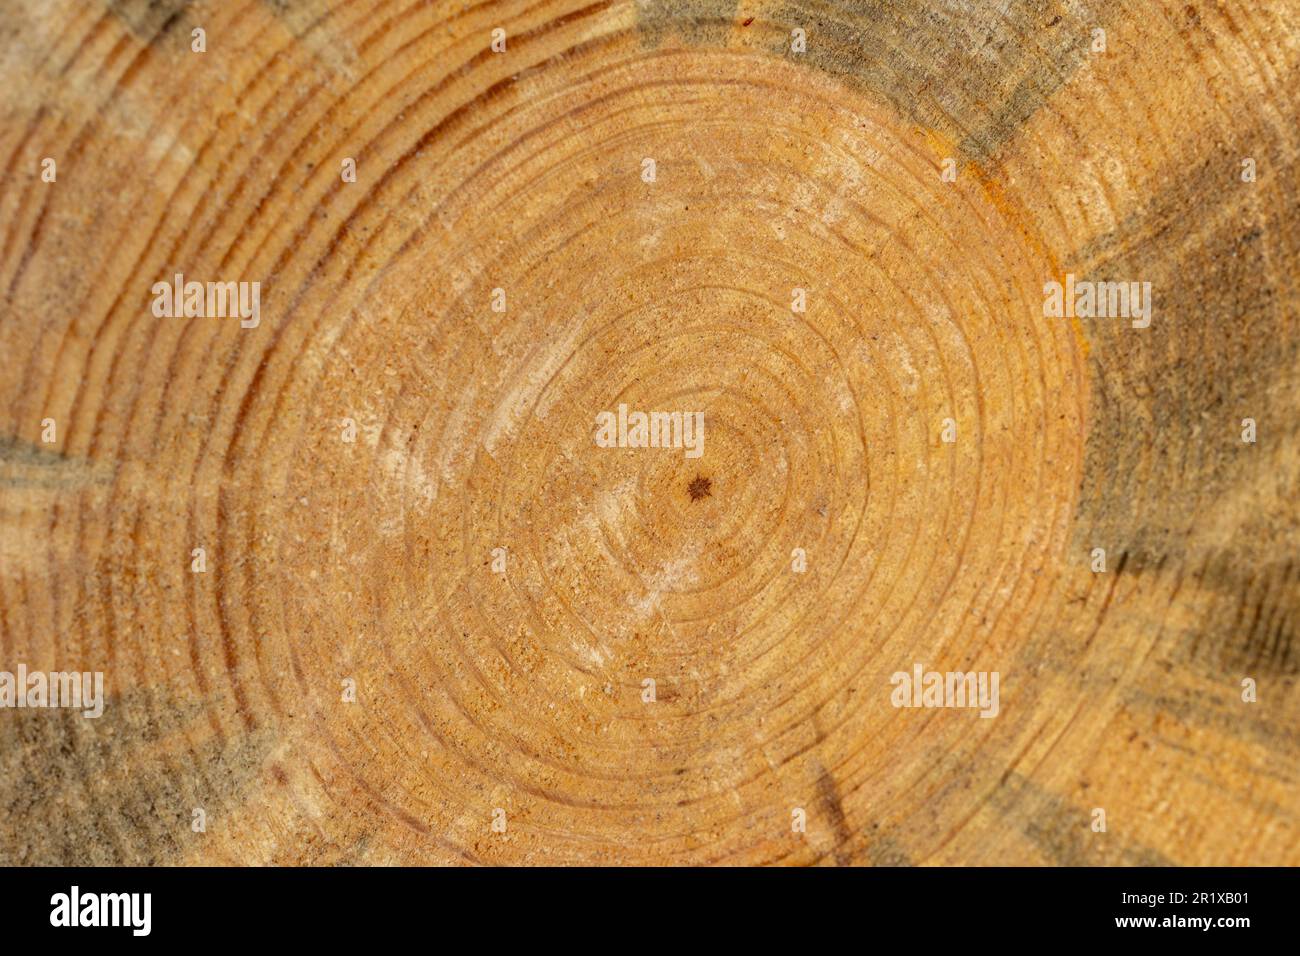 Rings on end of cut pine tree, space for copy on background. Stock Photo